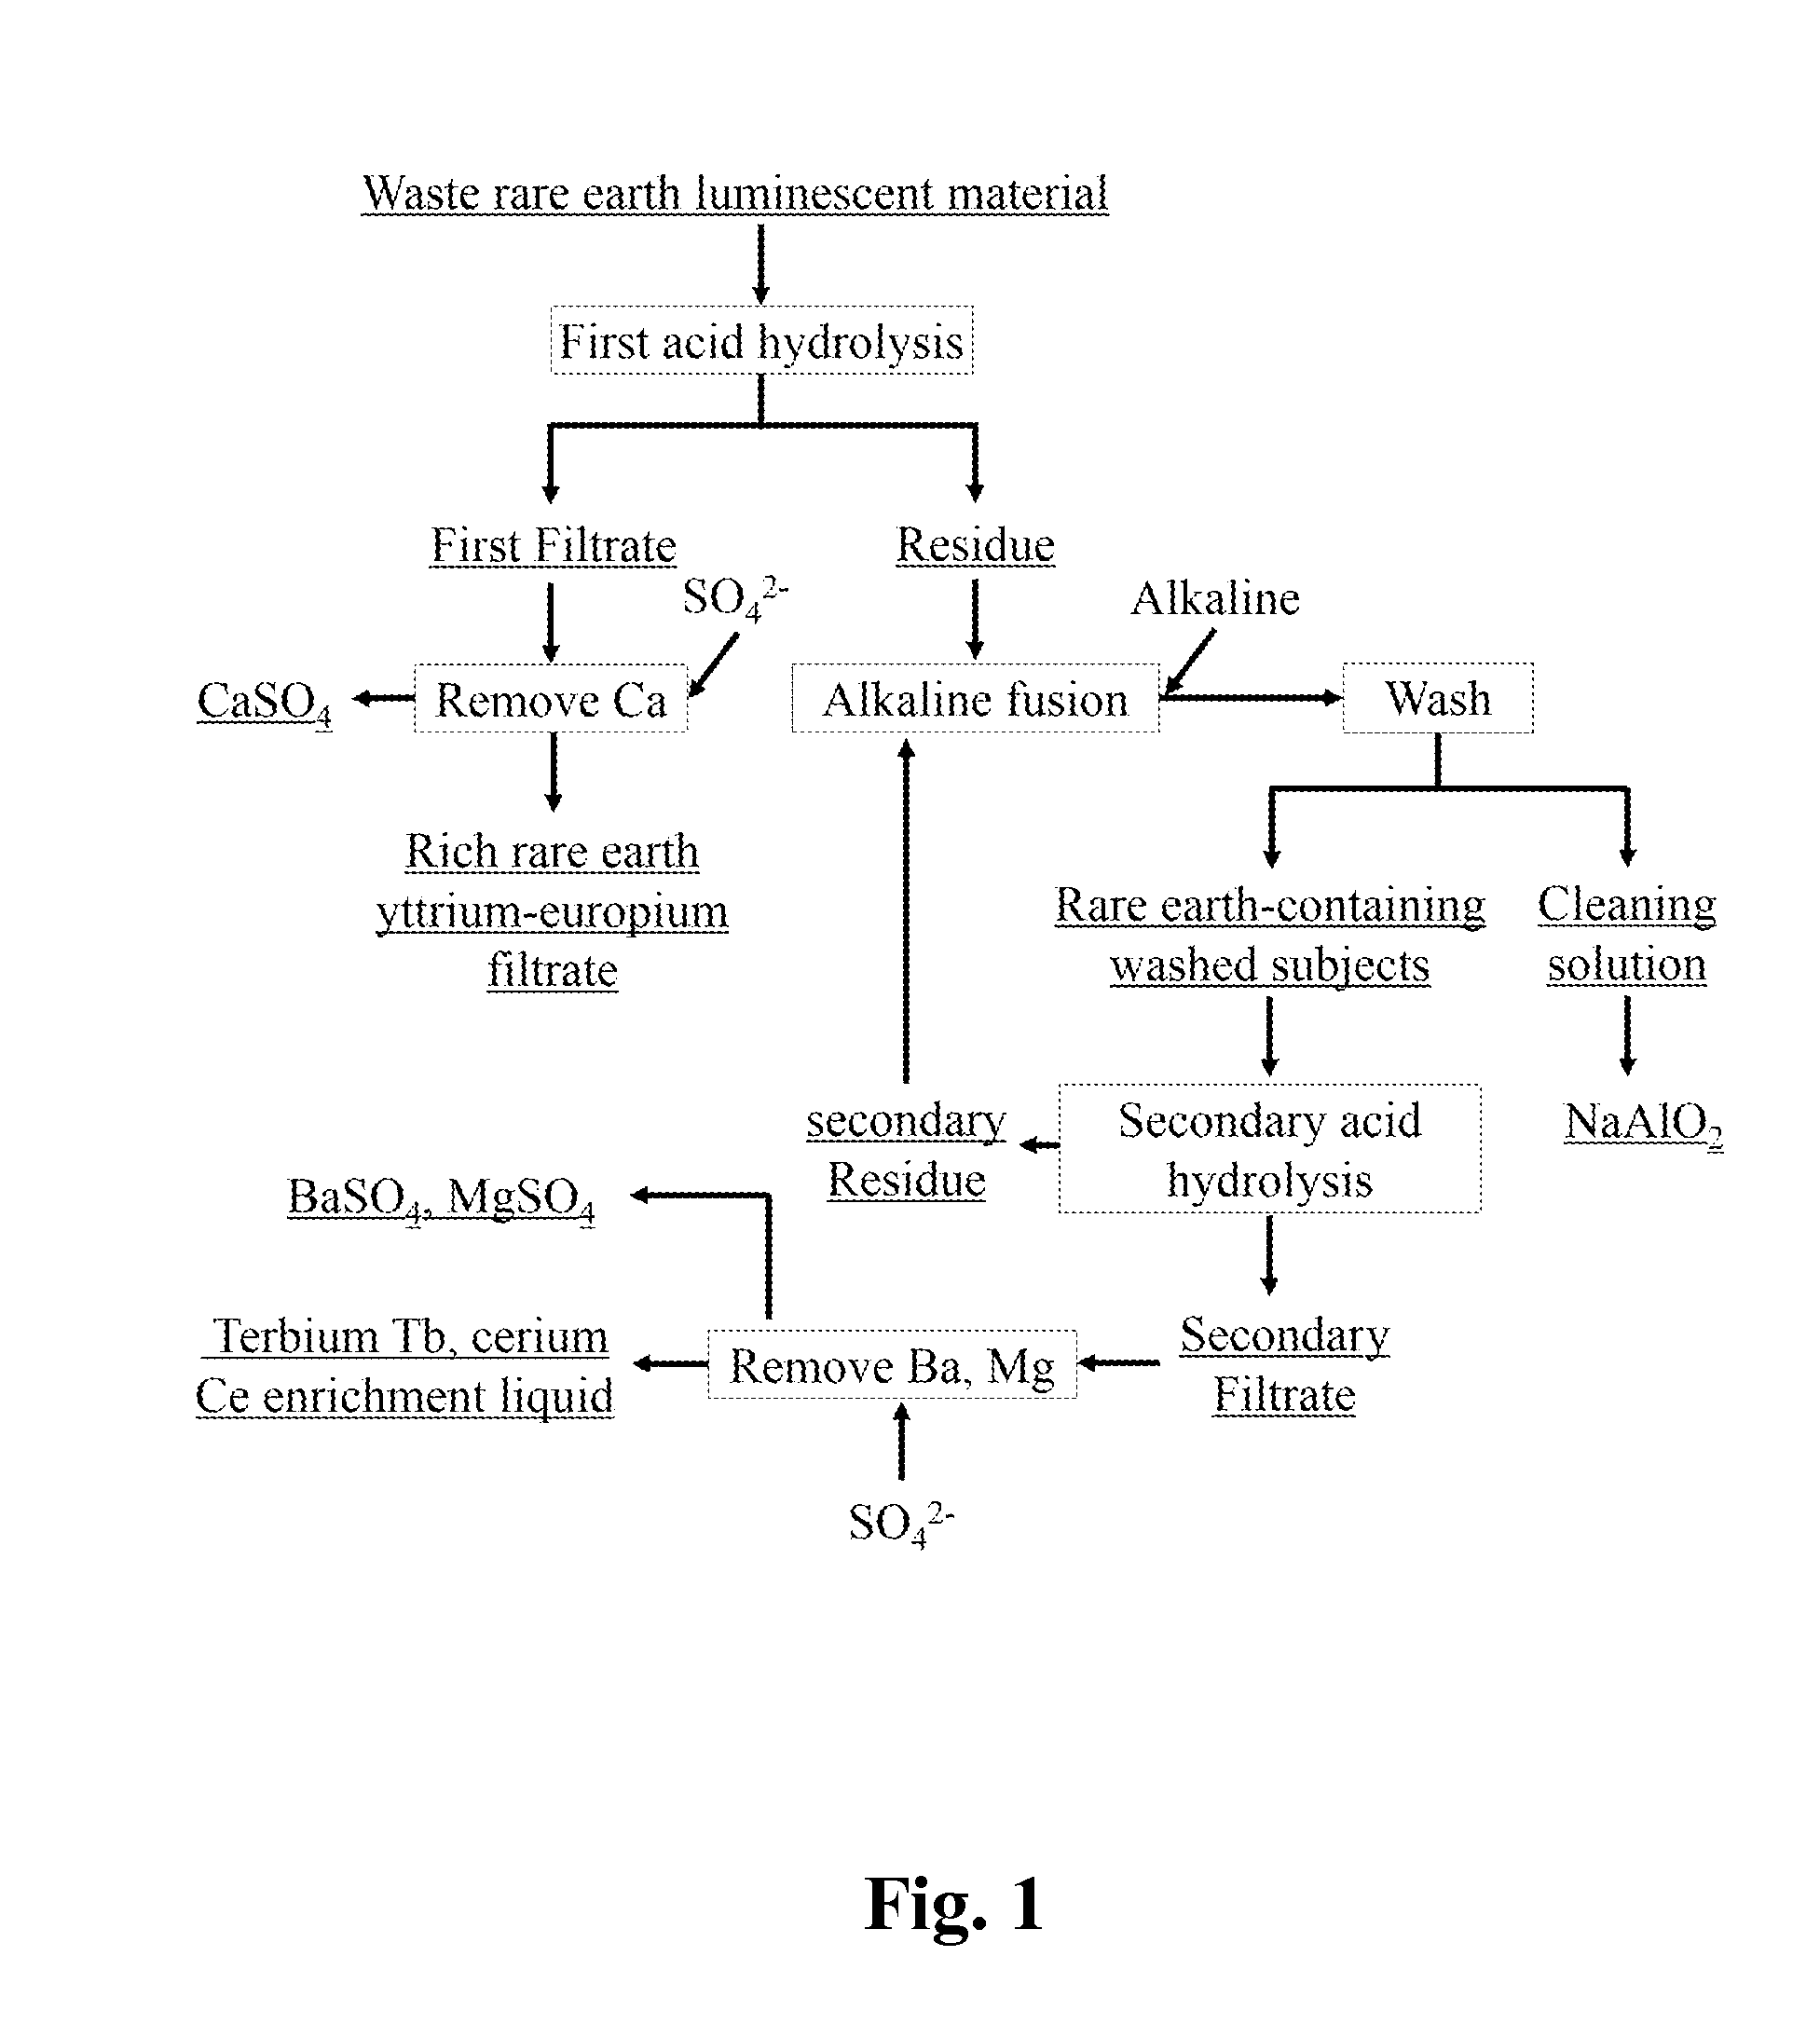 Method for Treating Waste Rare Earth Luminescent Material Using Dual Hydrochloric Acid Dissolution